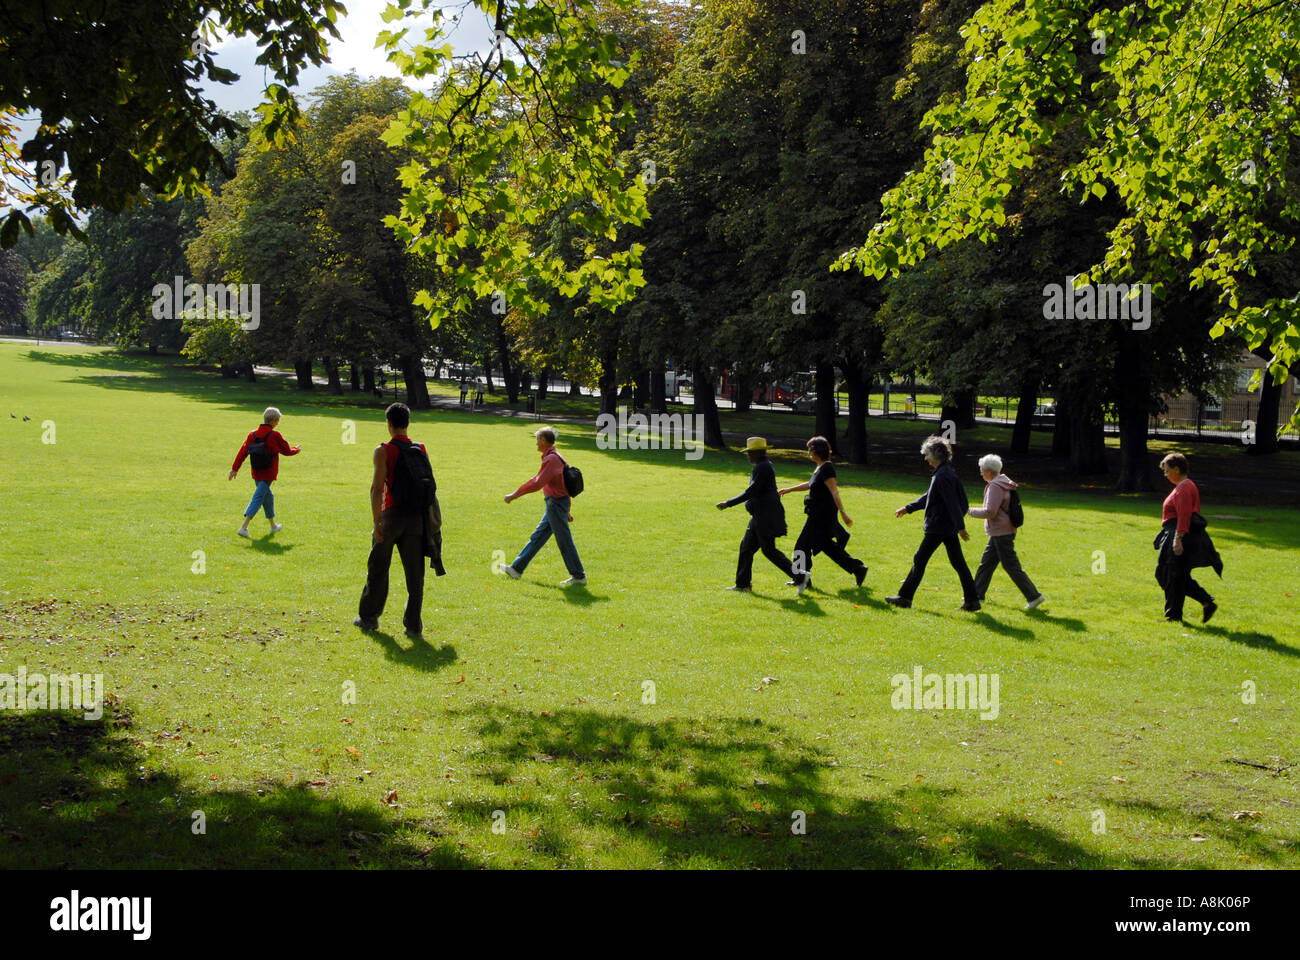 UK Third age group exercising in a London park Photo Julio Etchart Stock Photo